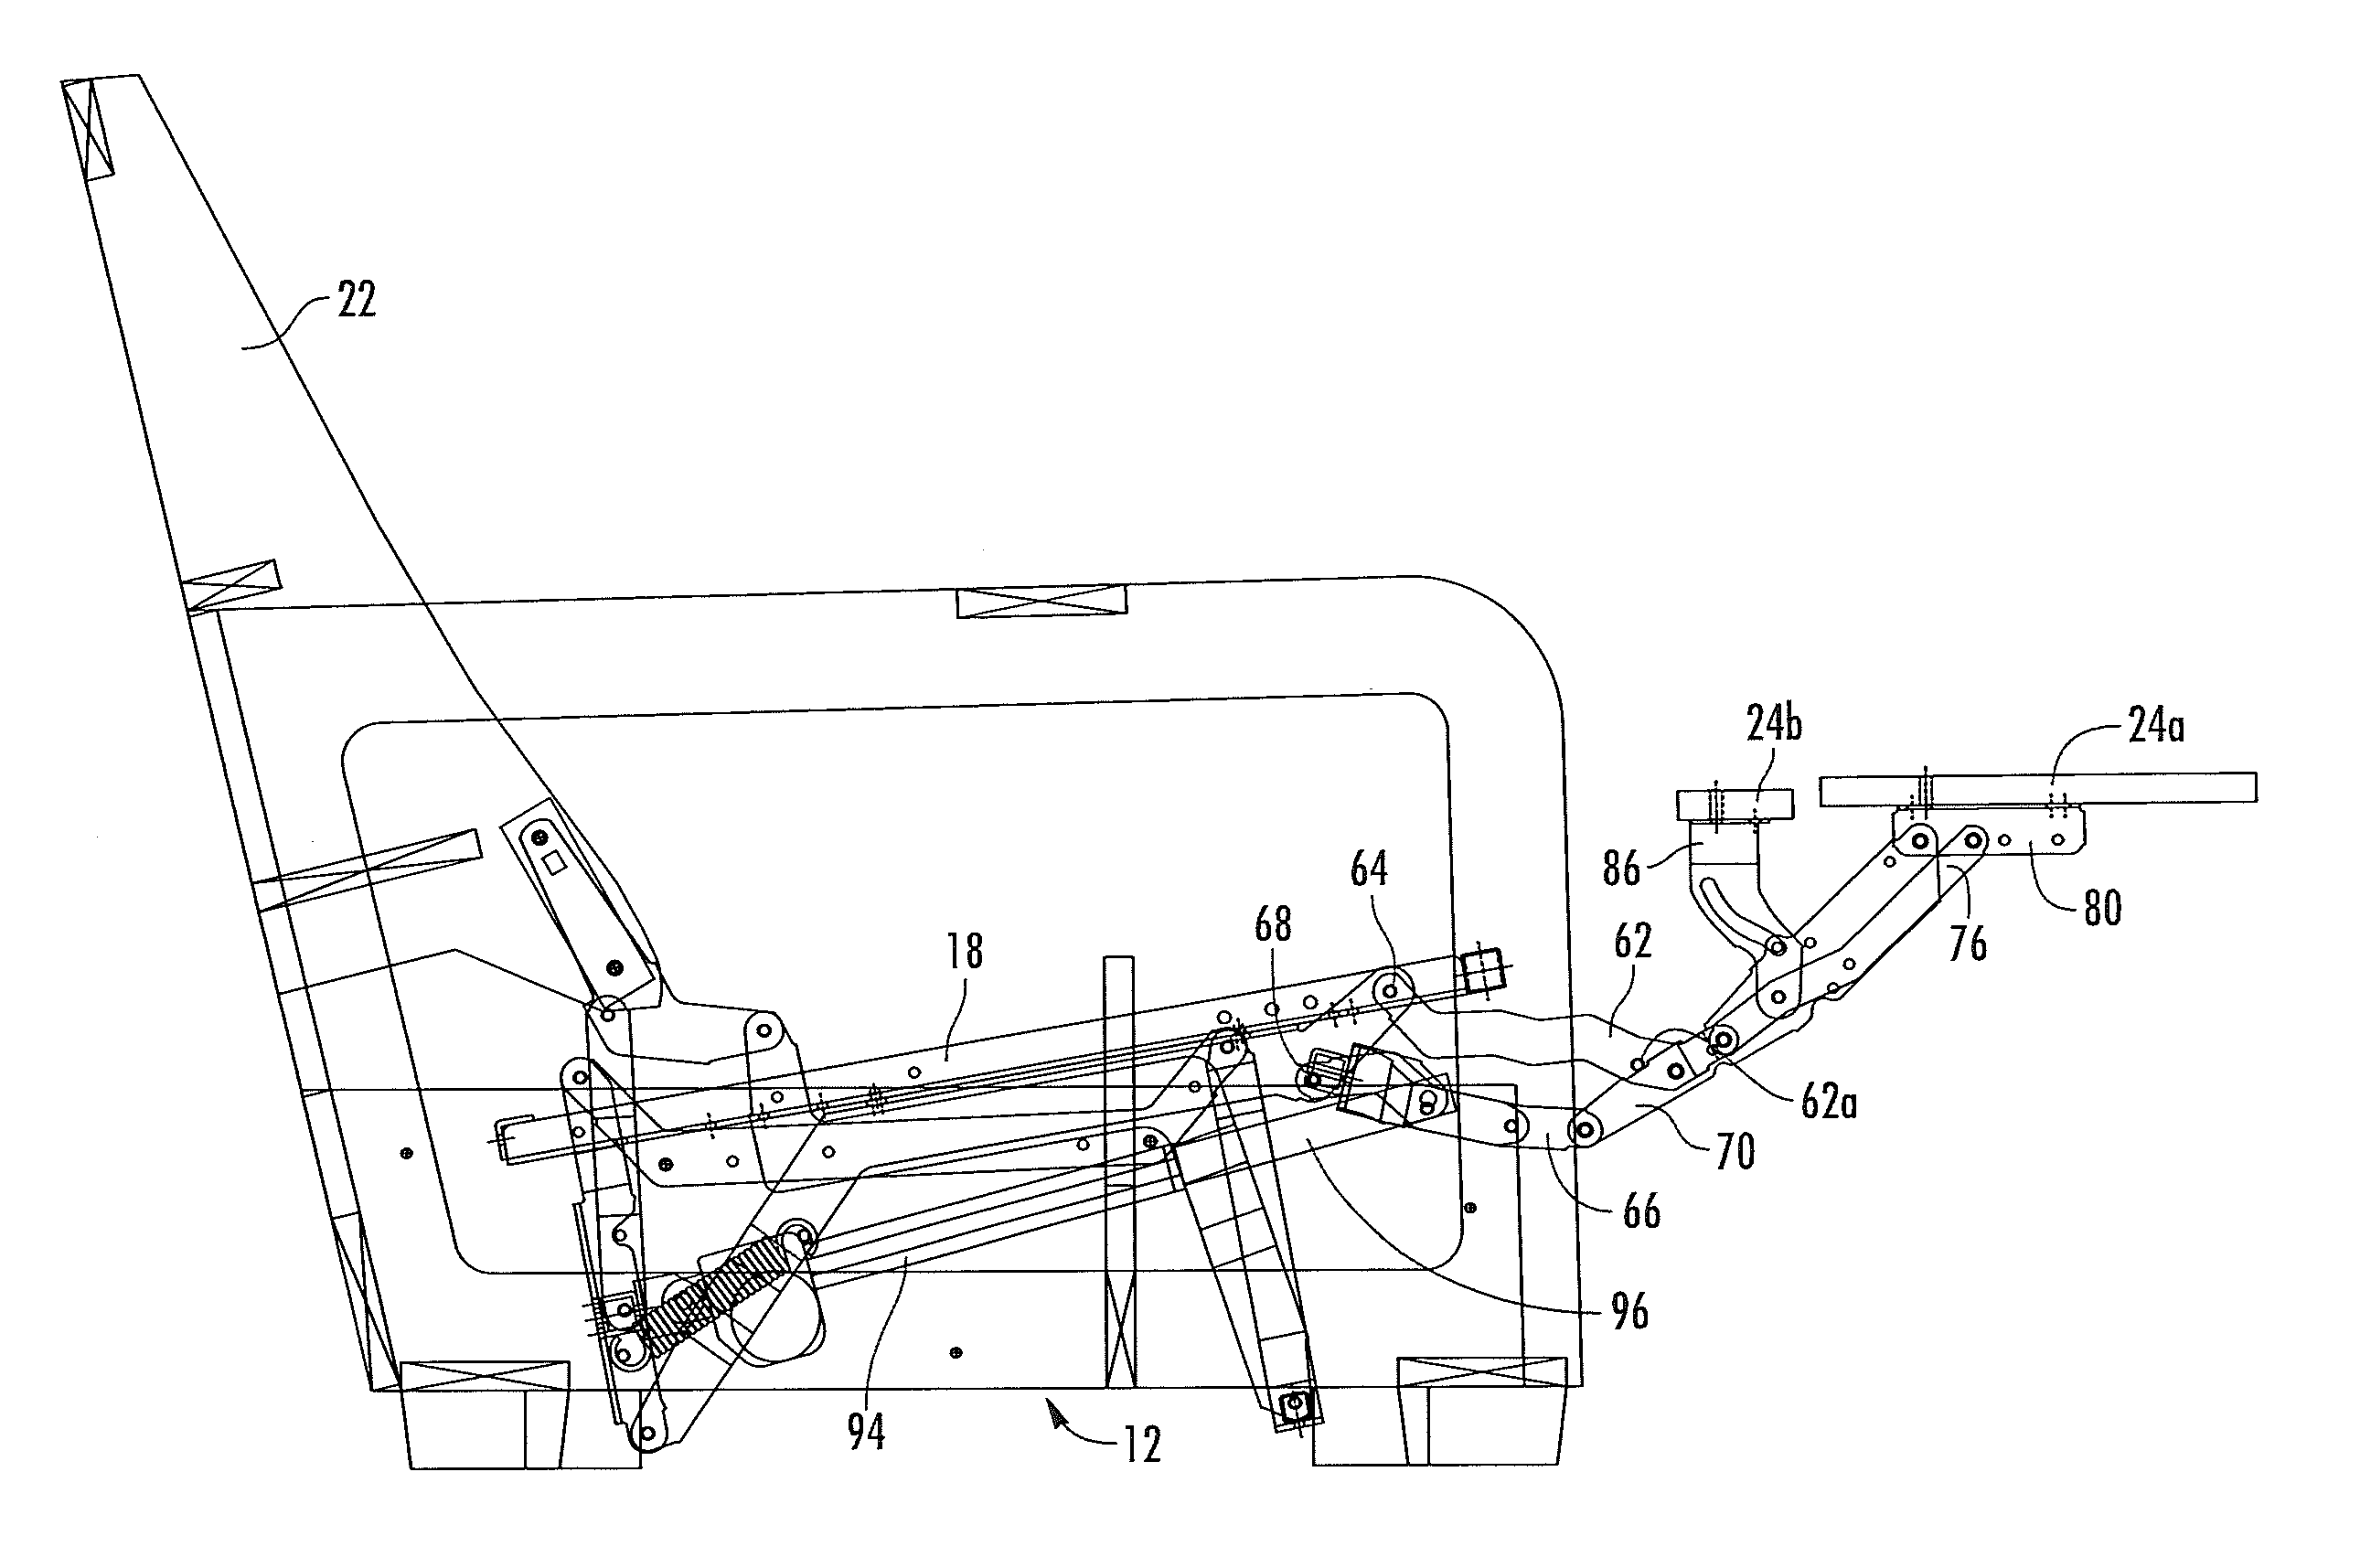 Reclining seating unit with wall-proximity capability